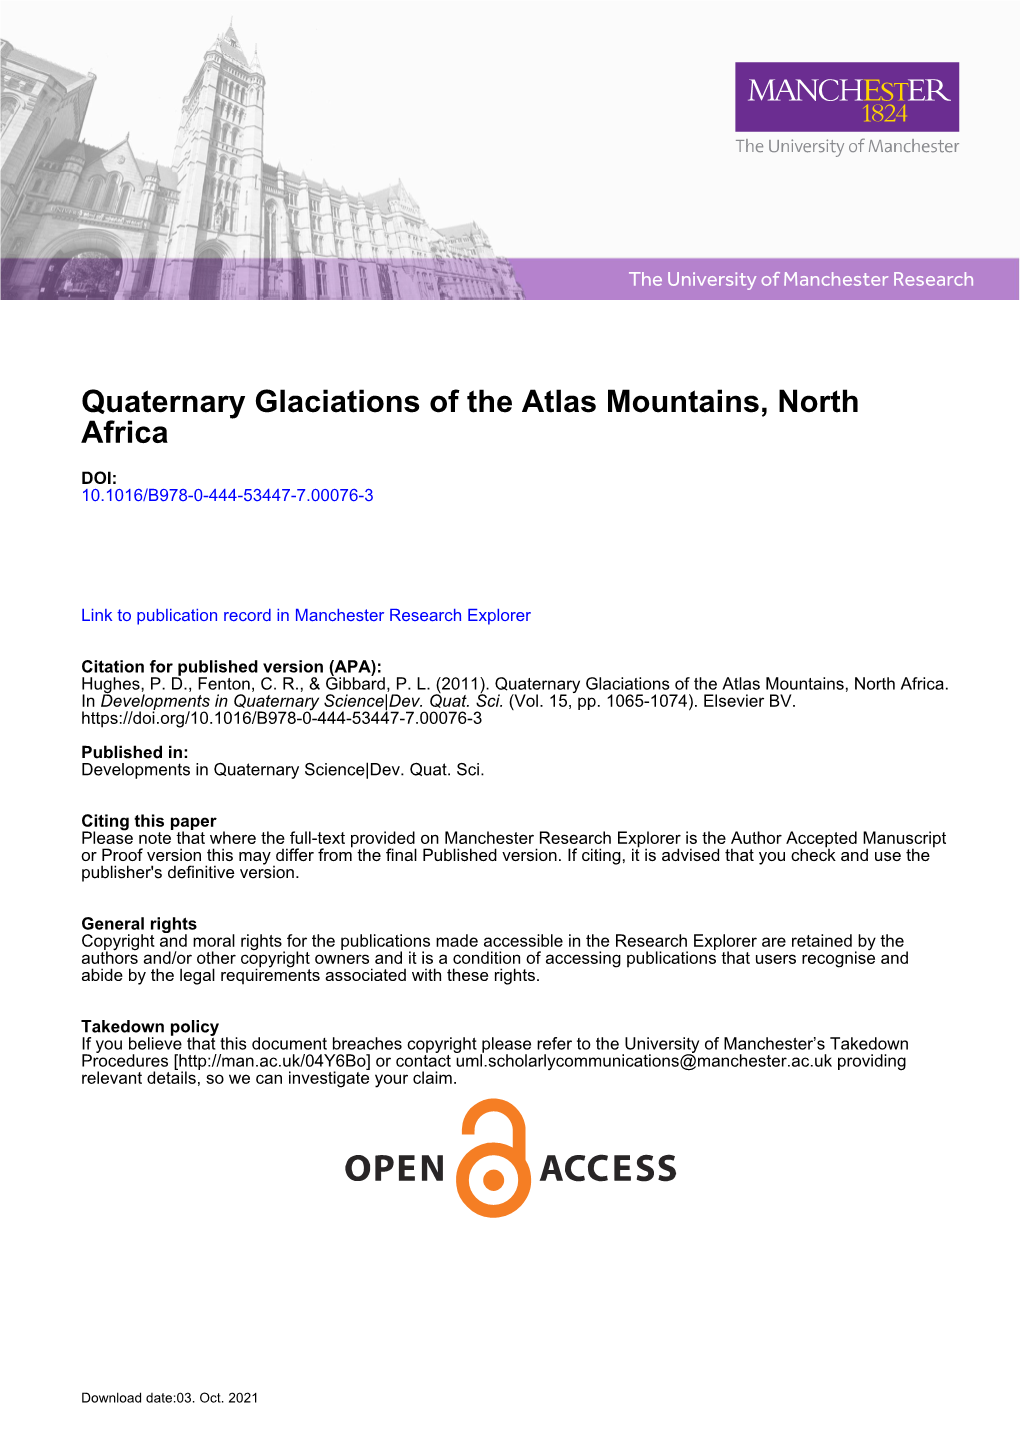 Quaternary Glaciations of the Atlas Mountains, North Africa